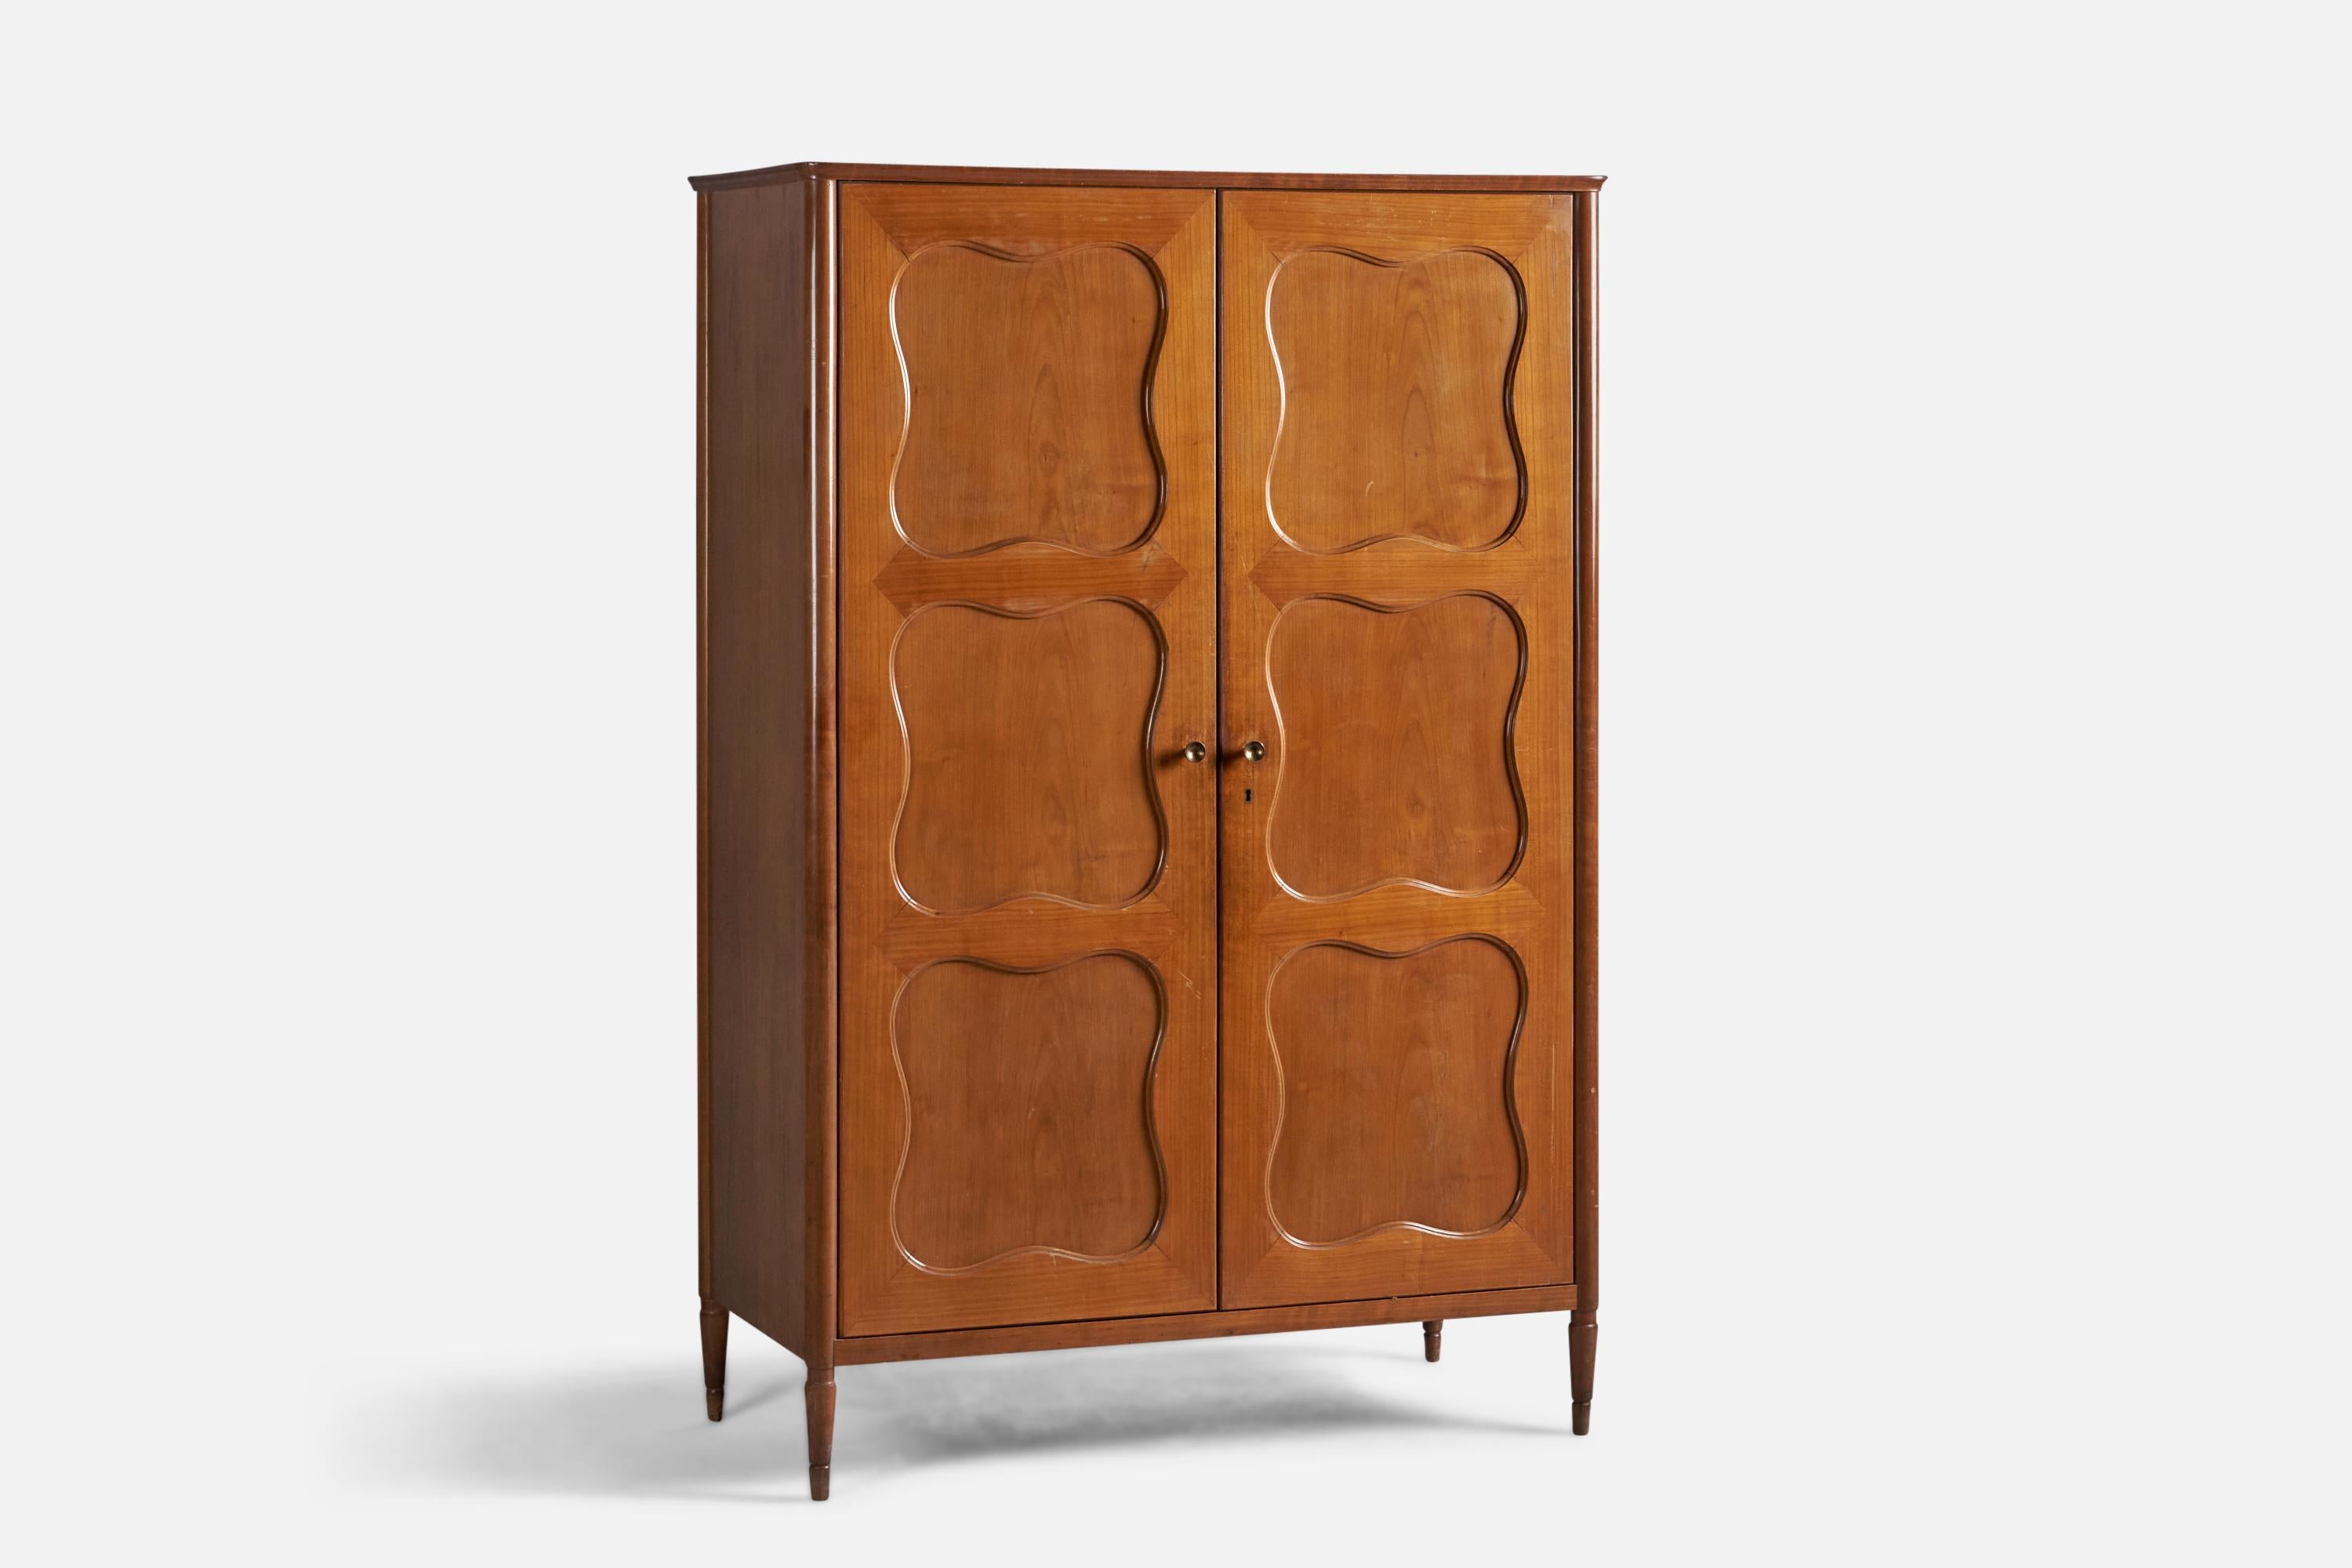 A sizeable walnut and brass wardrobe or cabinet, designed and produced by Paolo Buffa, Italy, 1940s.